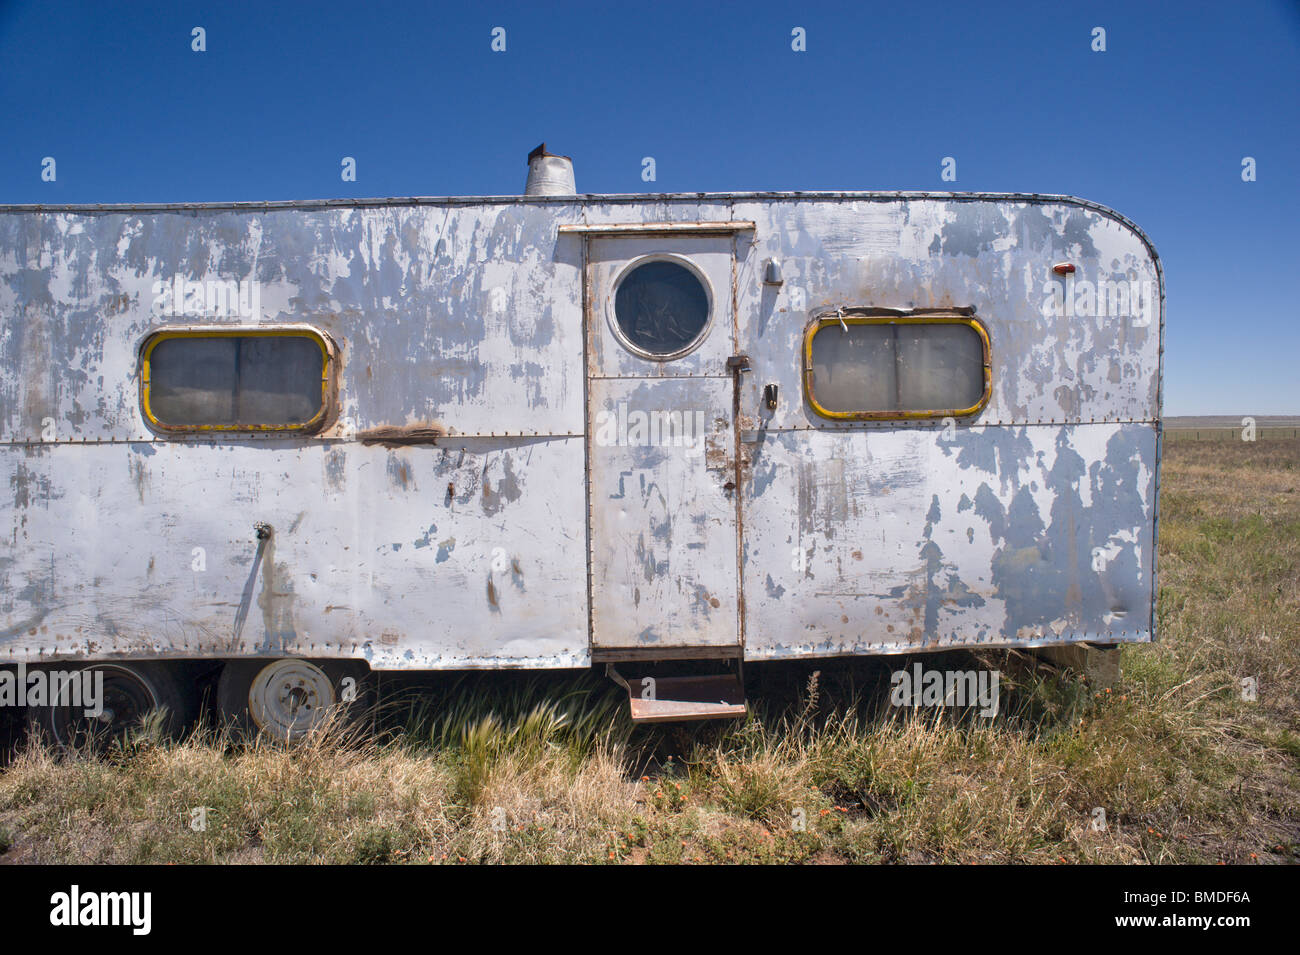 A frequent sight in New Mexico - a dented, paint-peeling, derelict camping trailer sitting in a weed-patch - Encino, New Mexico. Stock Photo